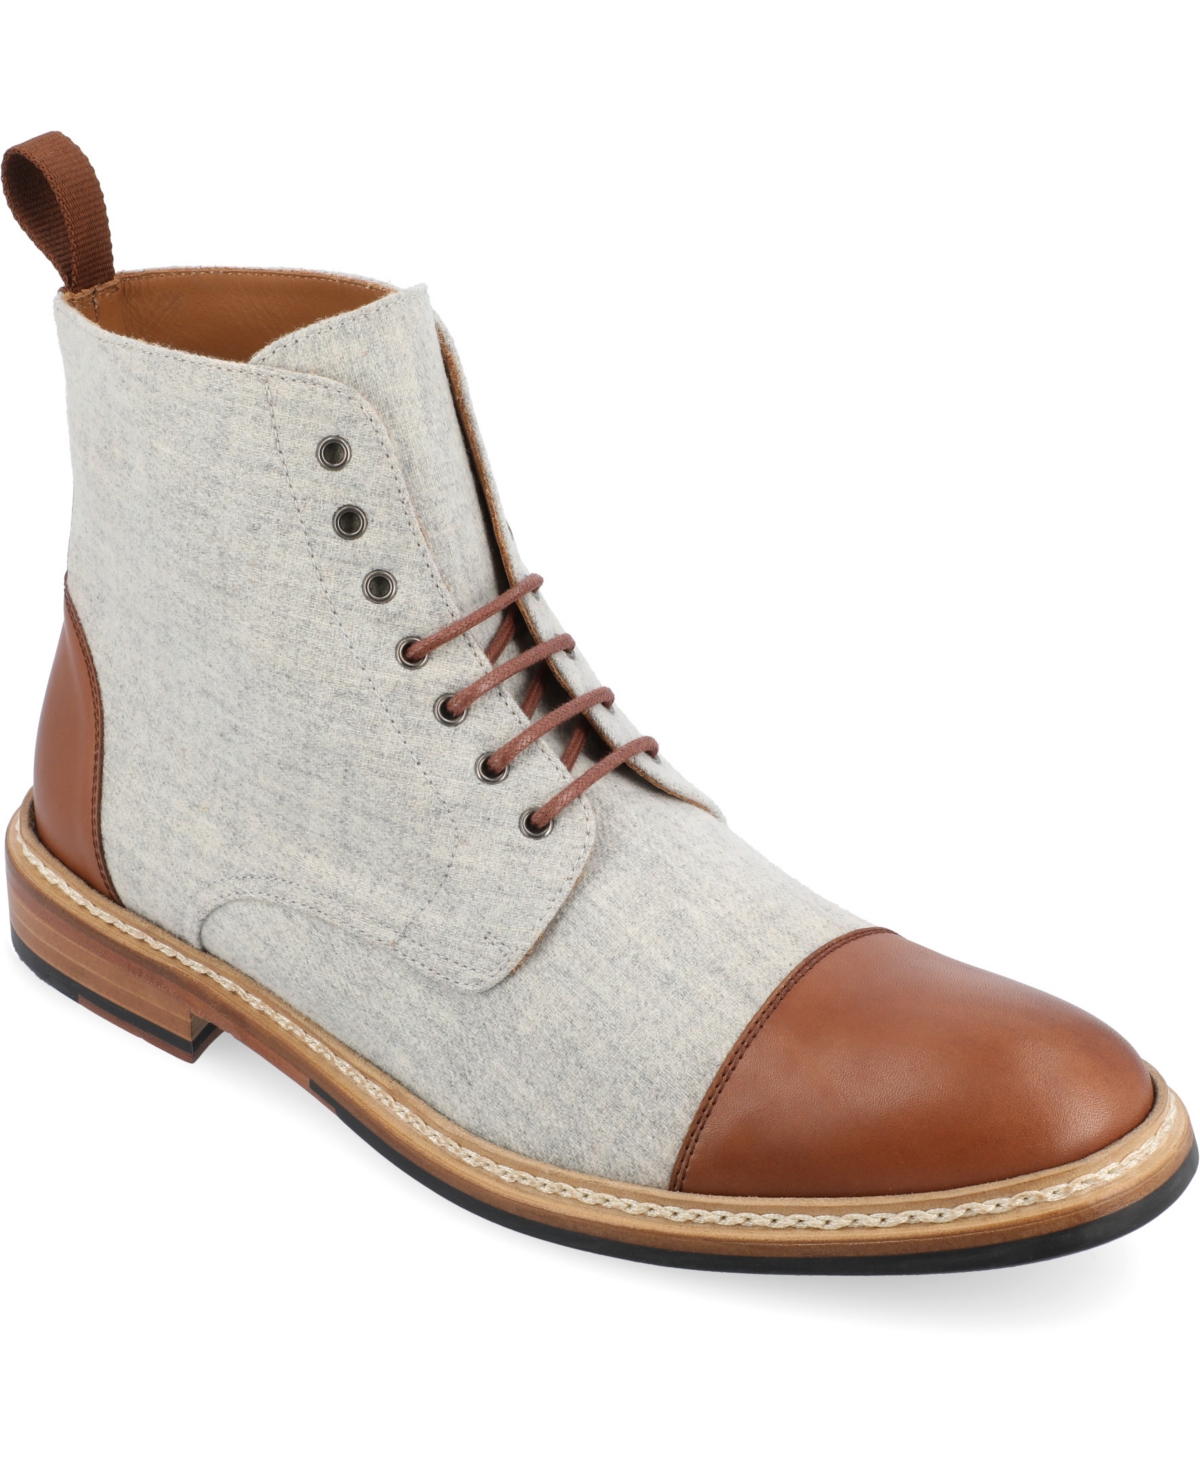 Men's The Jack Boot - Avalanche